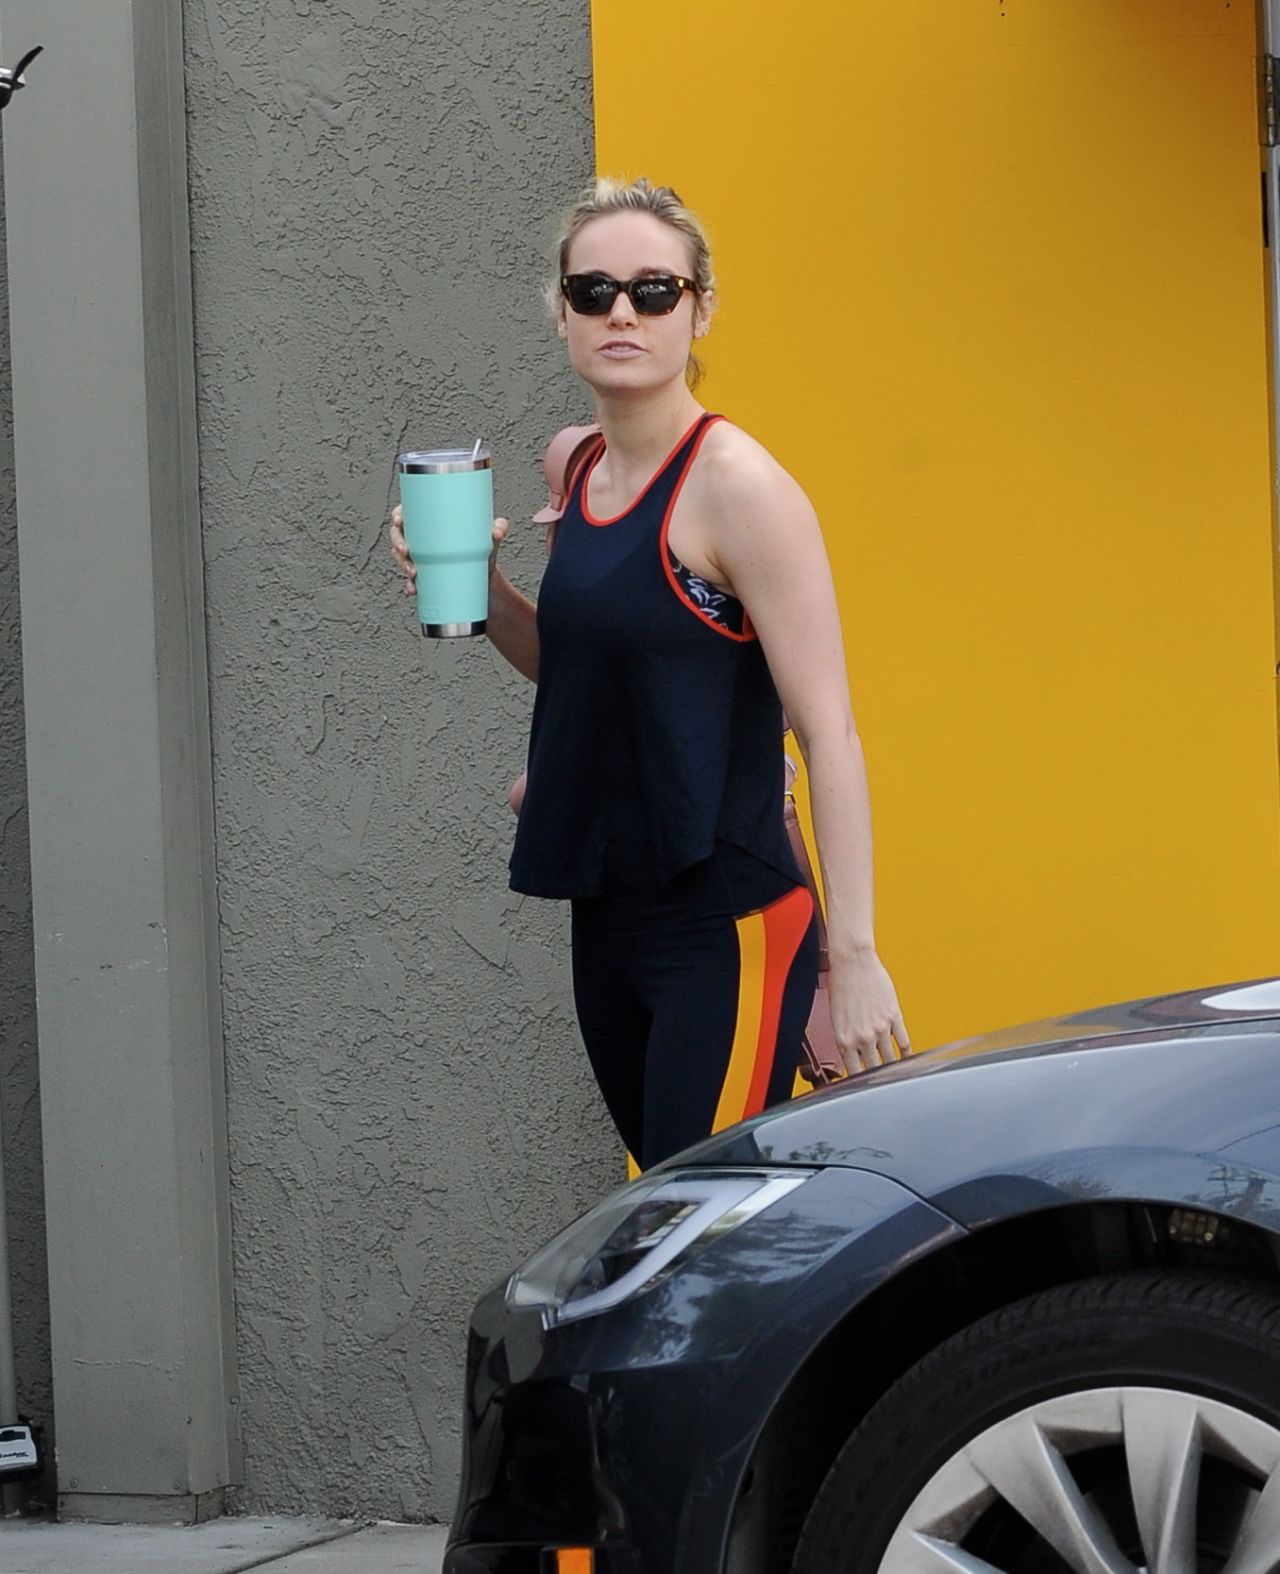 brie-larson-works-up-a-sweat-at-the-gym-in-la-january-2019-7.jpg